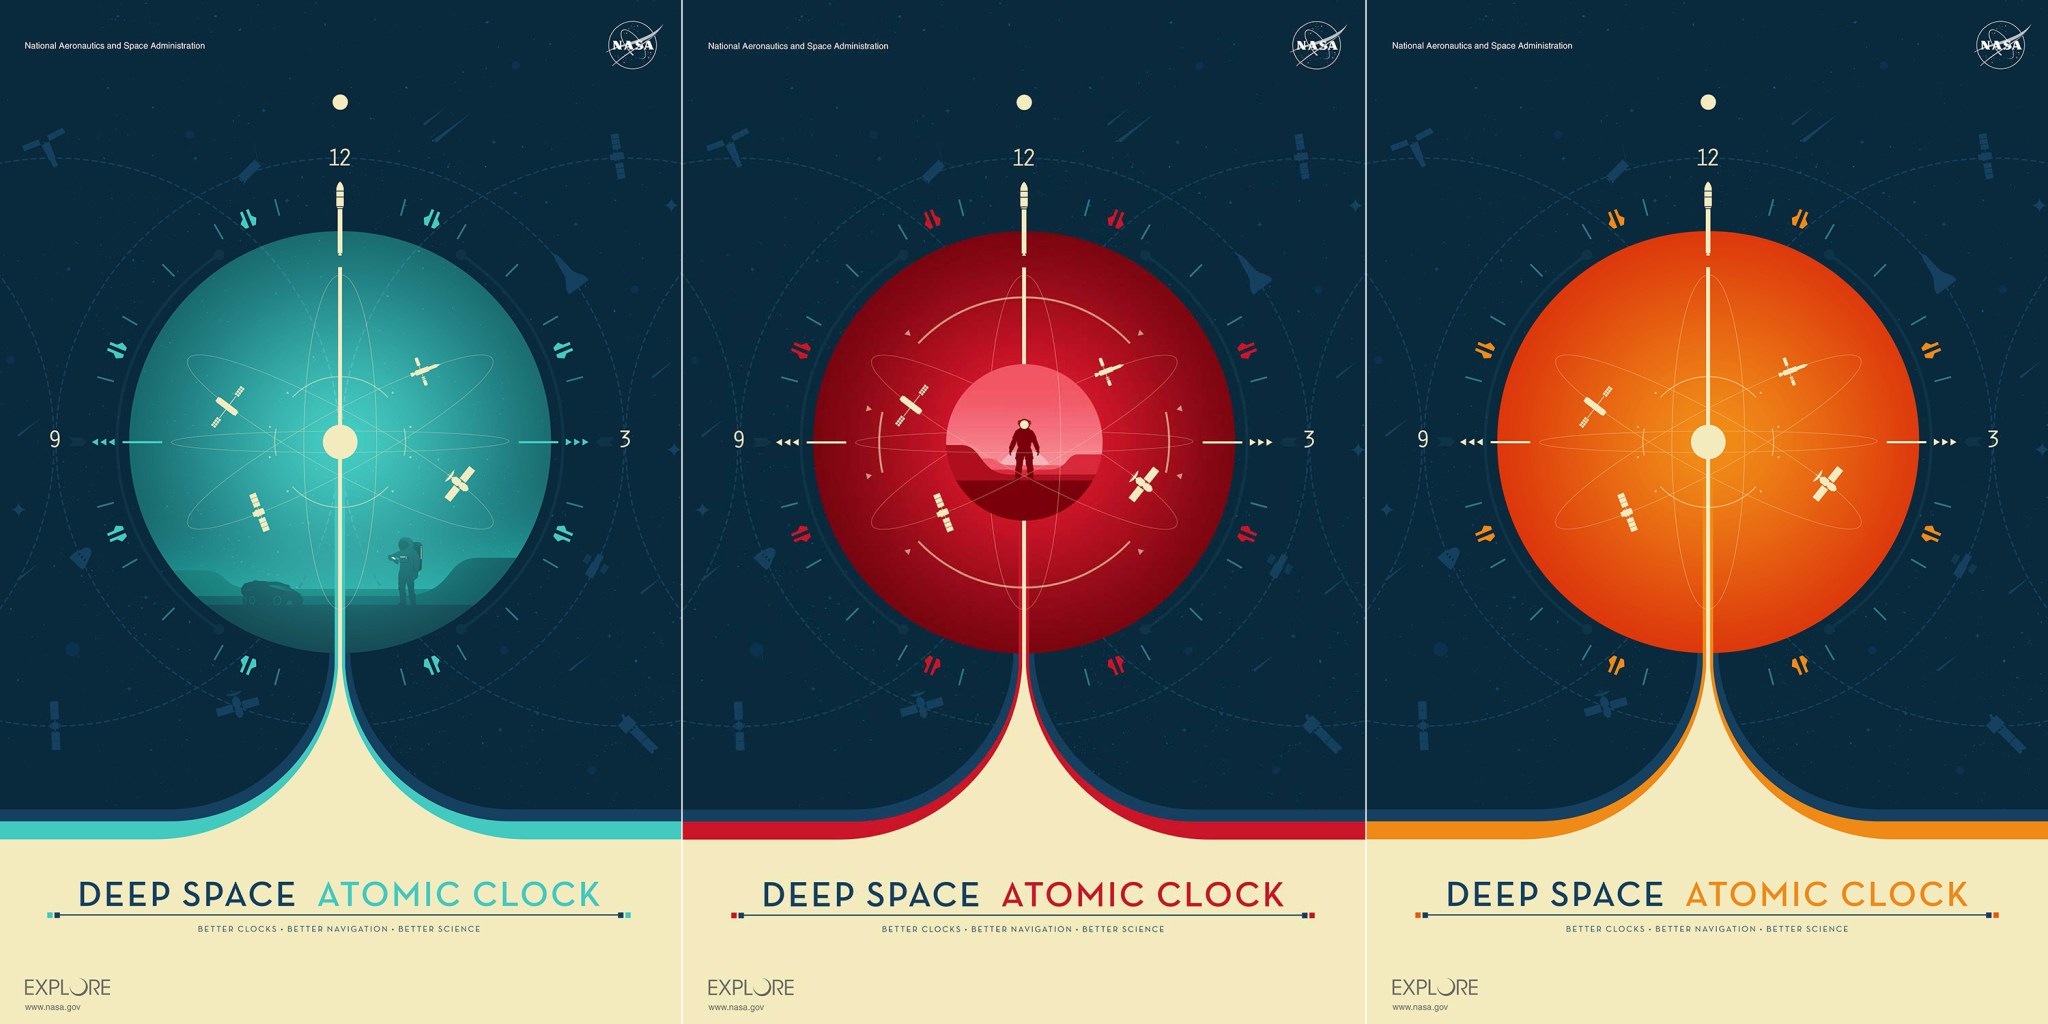 Three eye-catching posters featuring the Deep Space Atomic Clock and how future versions of the tech demo may be used by spacecraft and astronauts are available for download.